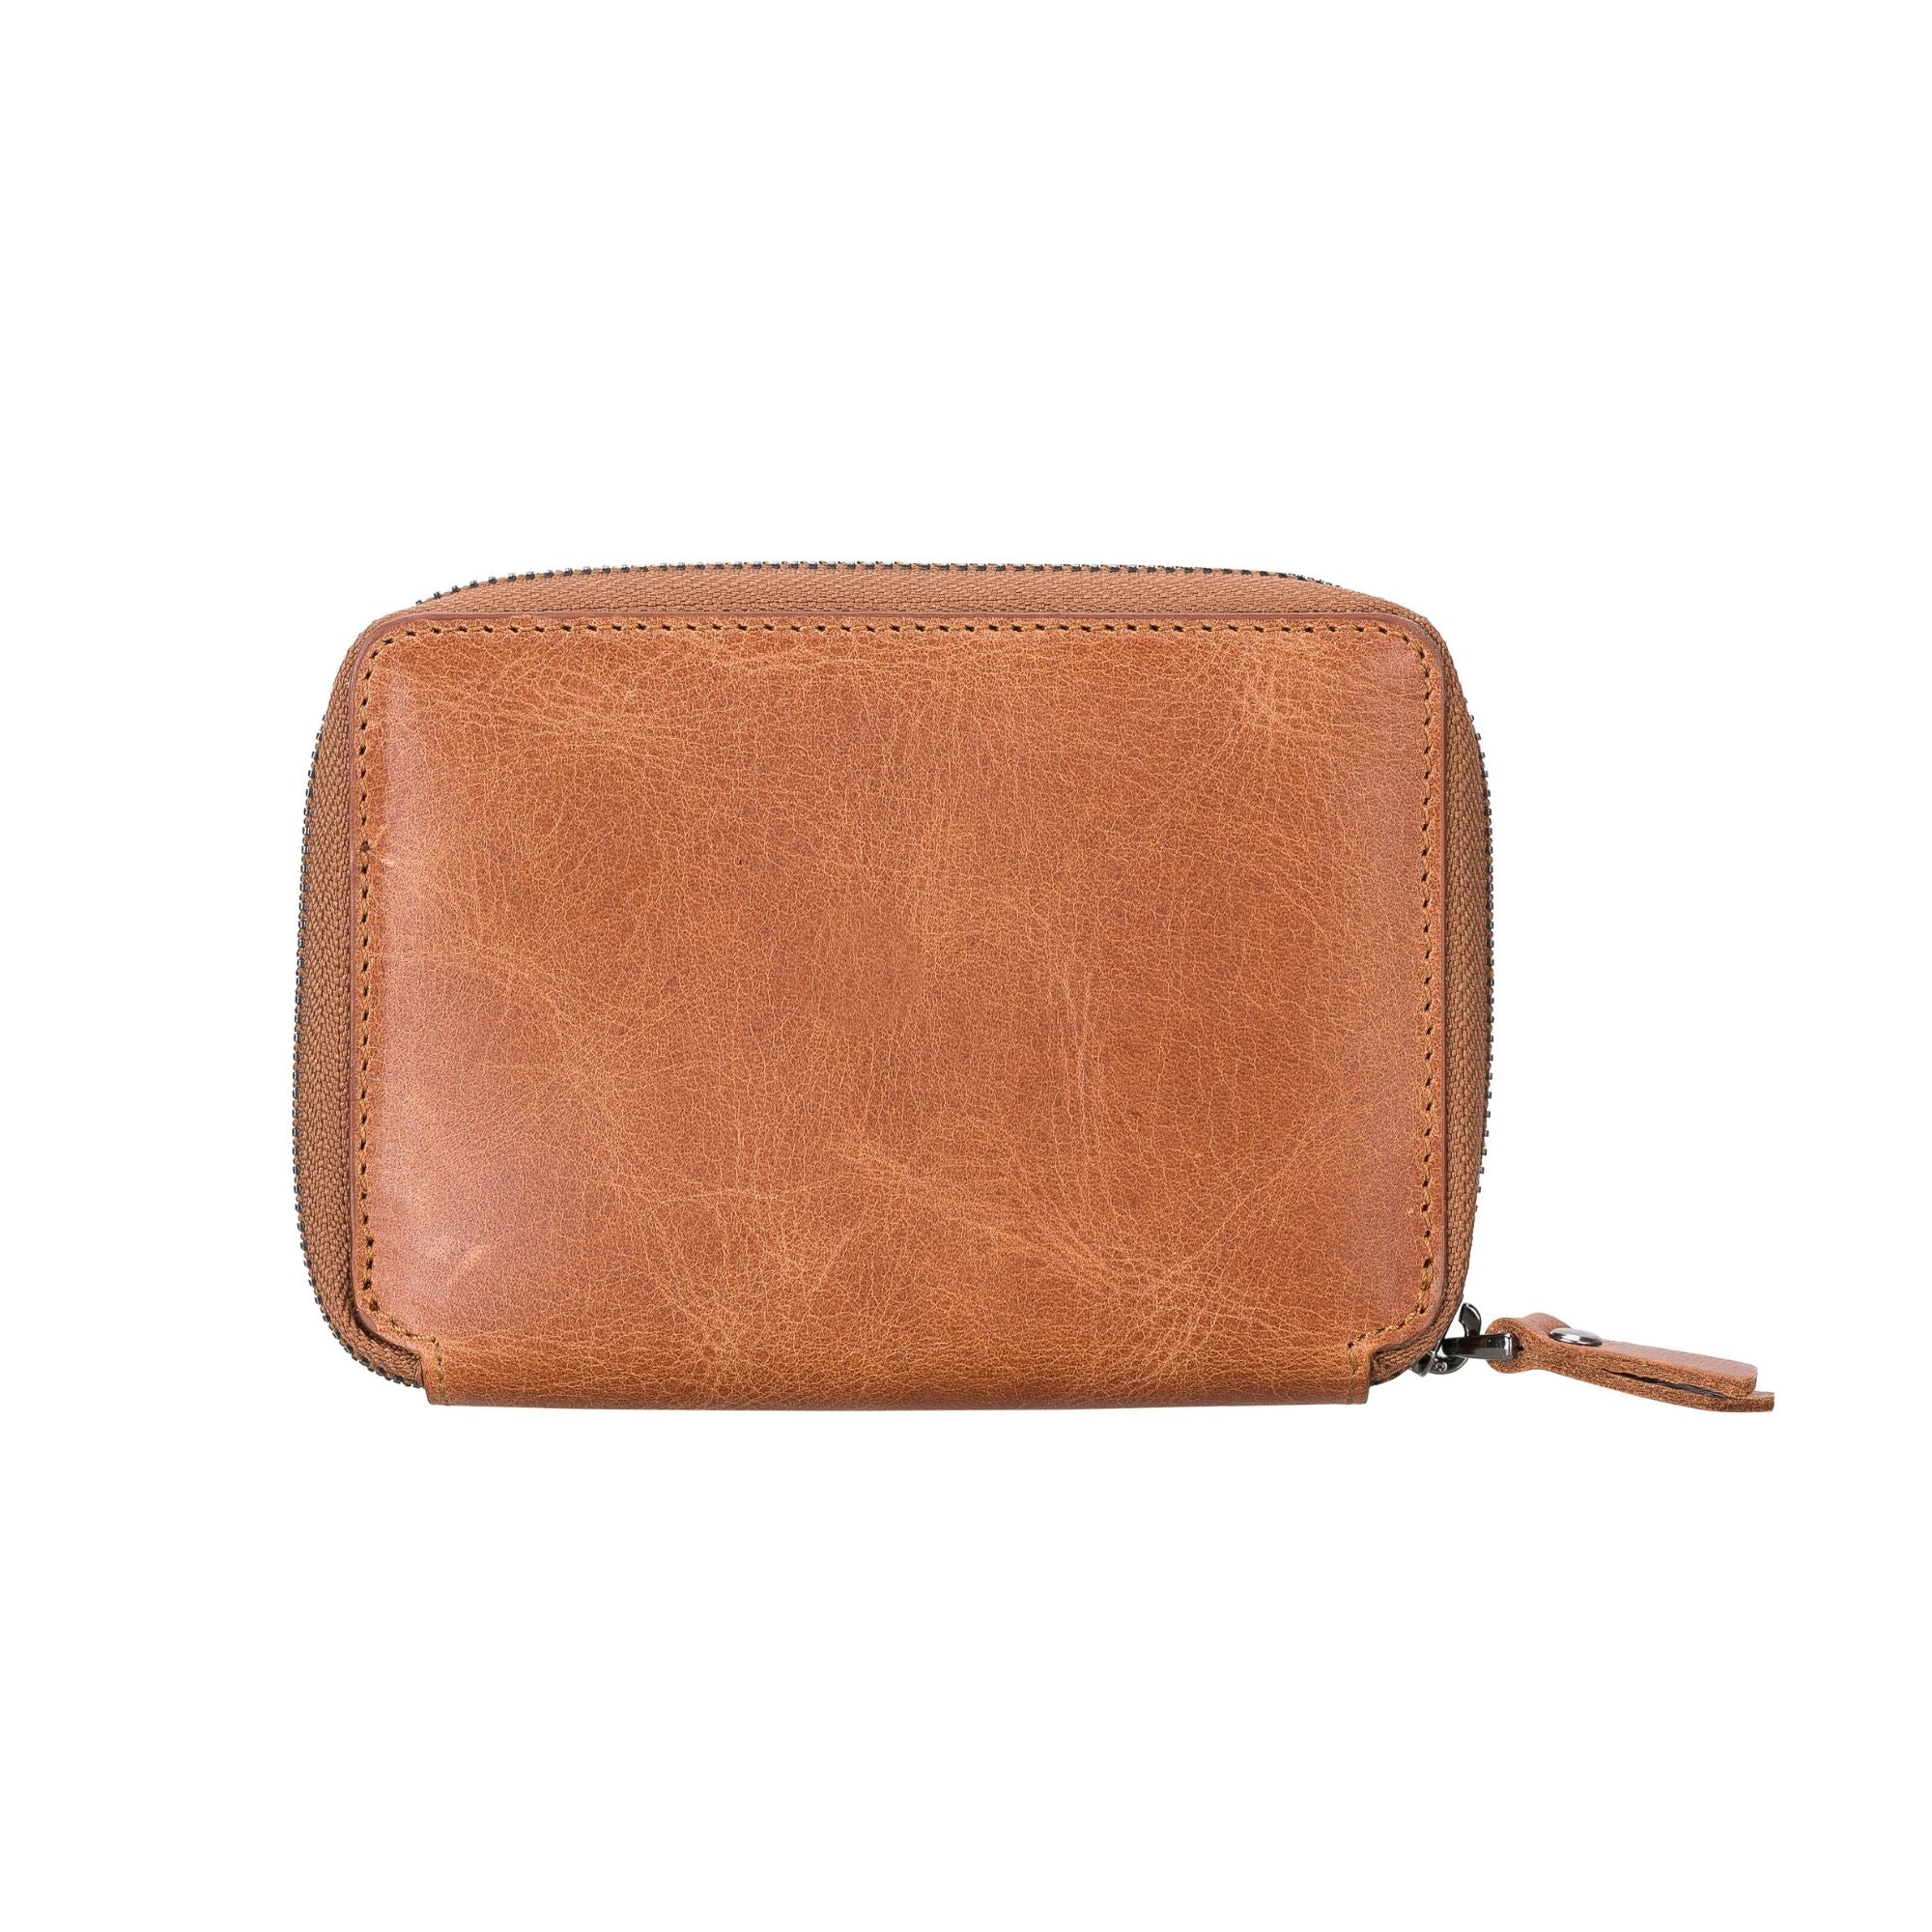 Powell Handmade Unisex Leather Wallet with Zippered Compartment - Tan - TORONATA